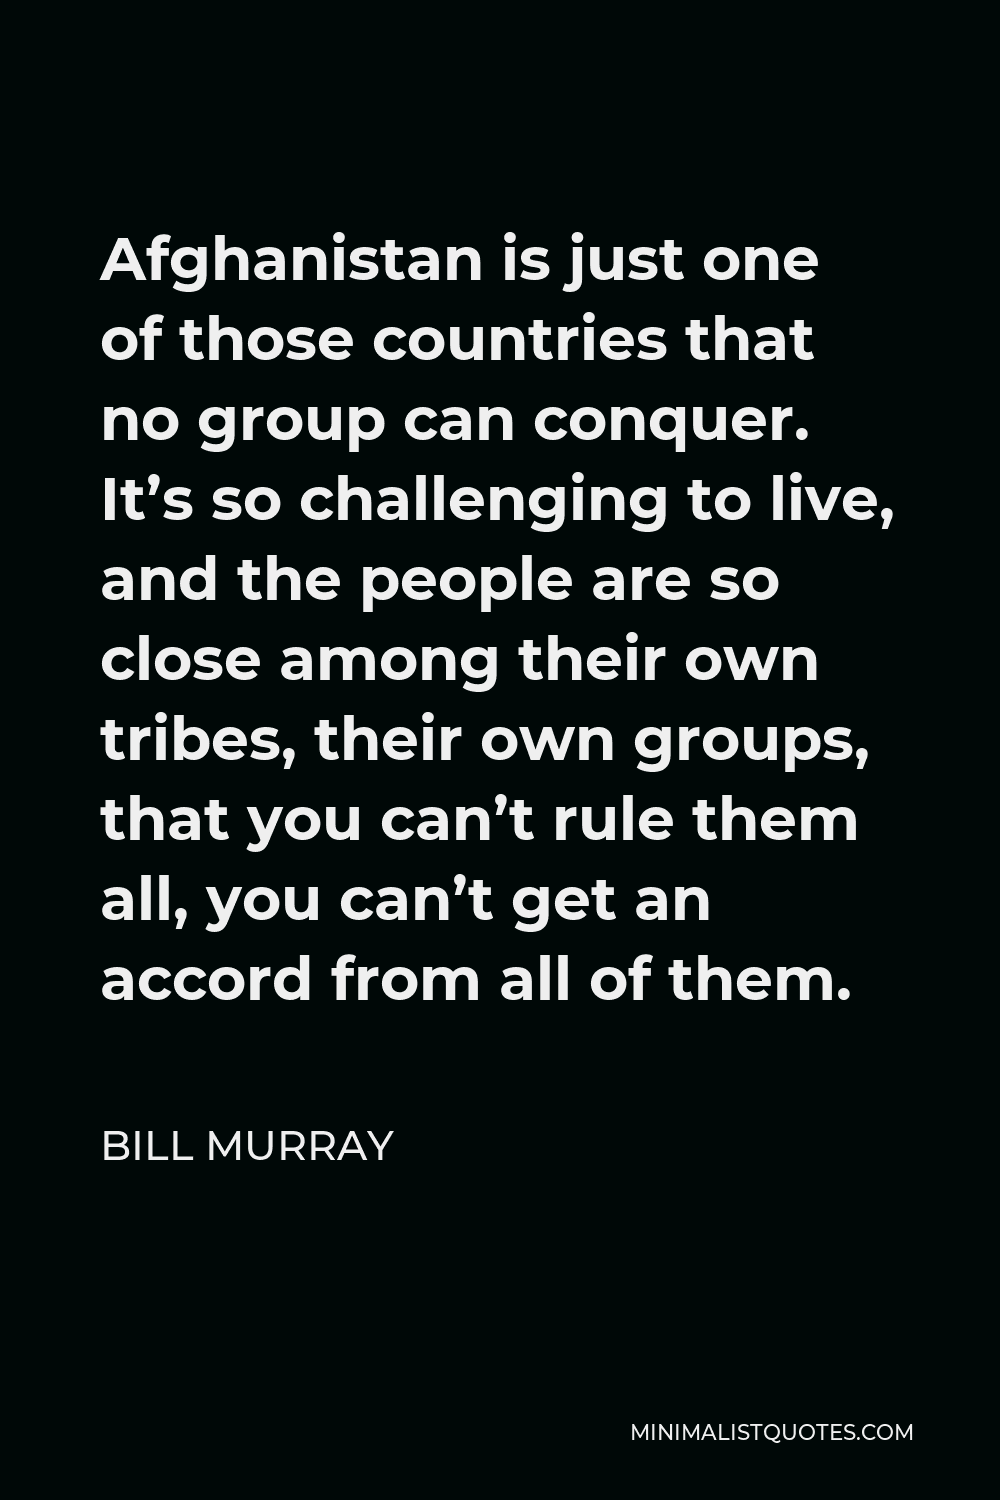 Bill Murray Quote - Afghanistan is just one of those countries that no group can conquer. It’s so challenging to live, and the people are so close among their own tribes, their own groups, that you can’t rule them all, you can’t get an accord from all of them.